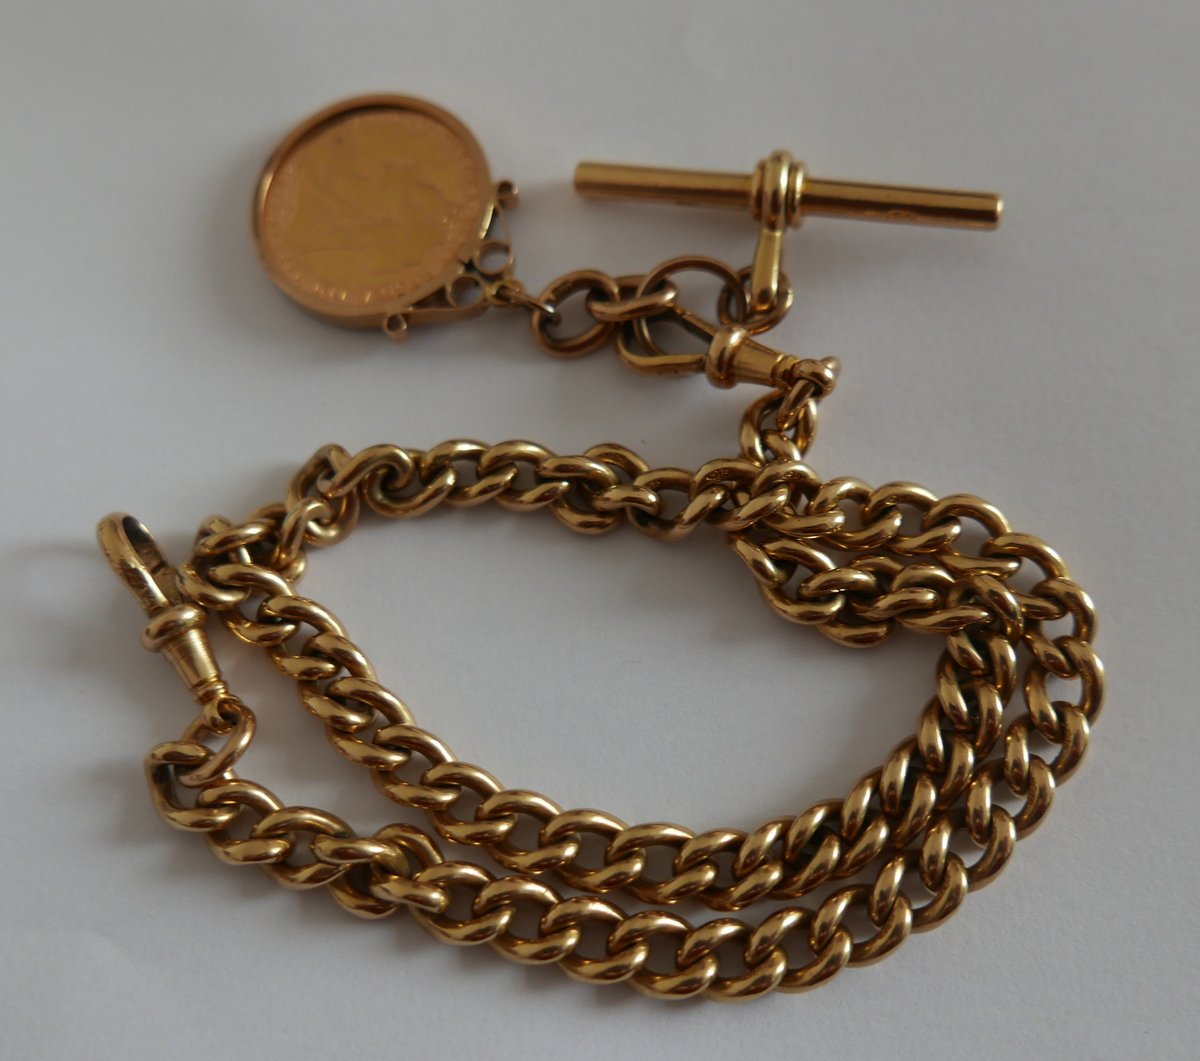 Antique 18 karat Gold Single Albert Chain with a attached 1900 Full Sovereign. - Image 3 of 4